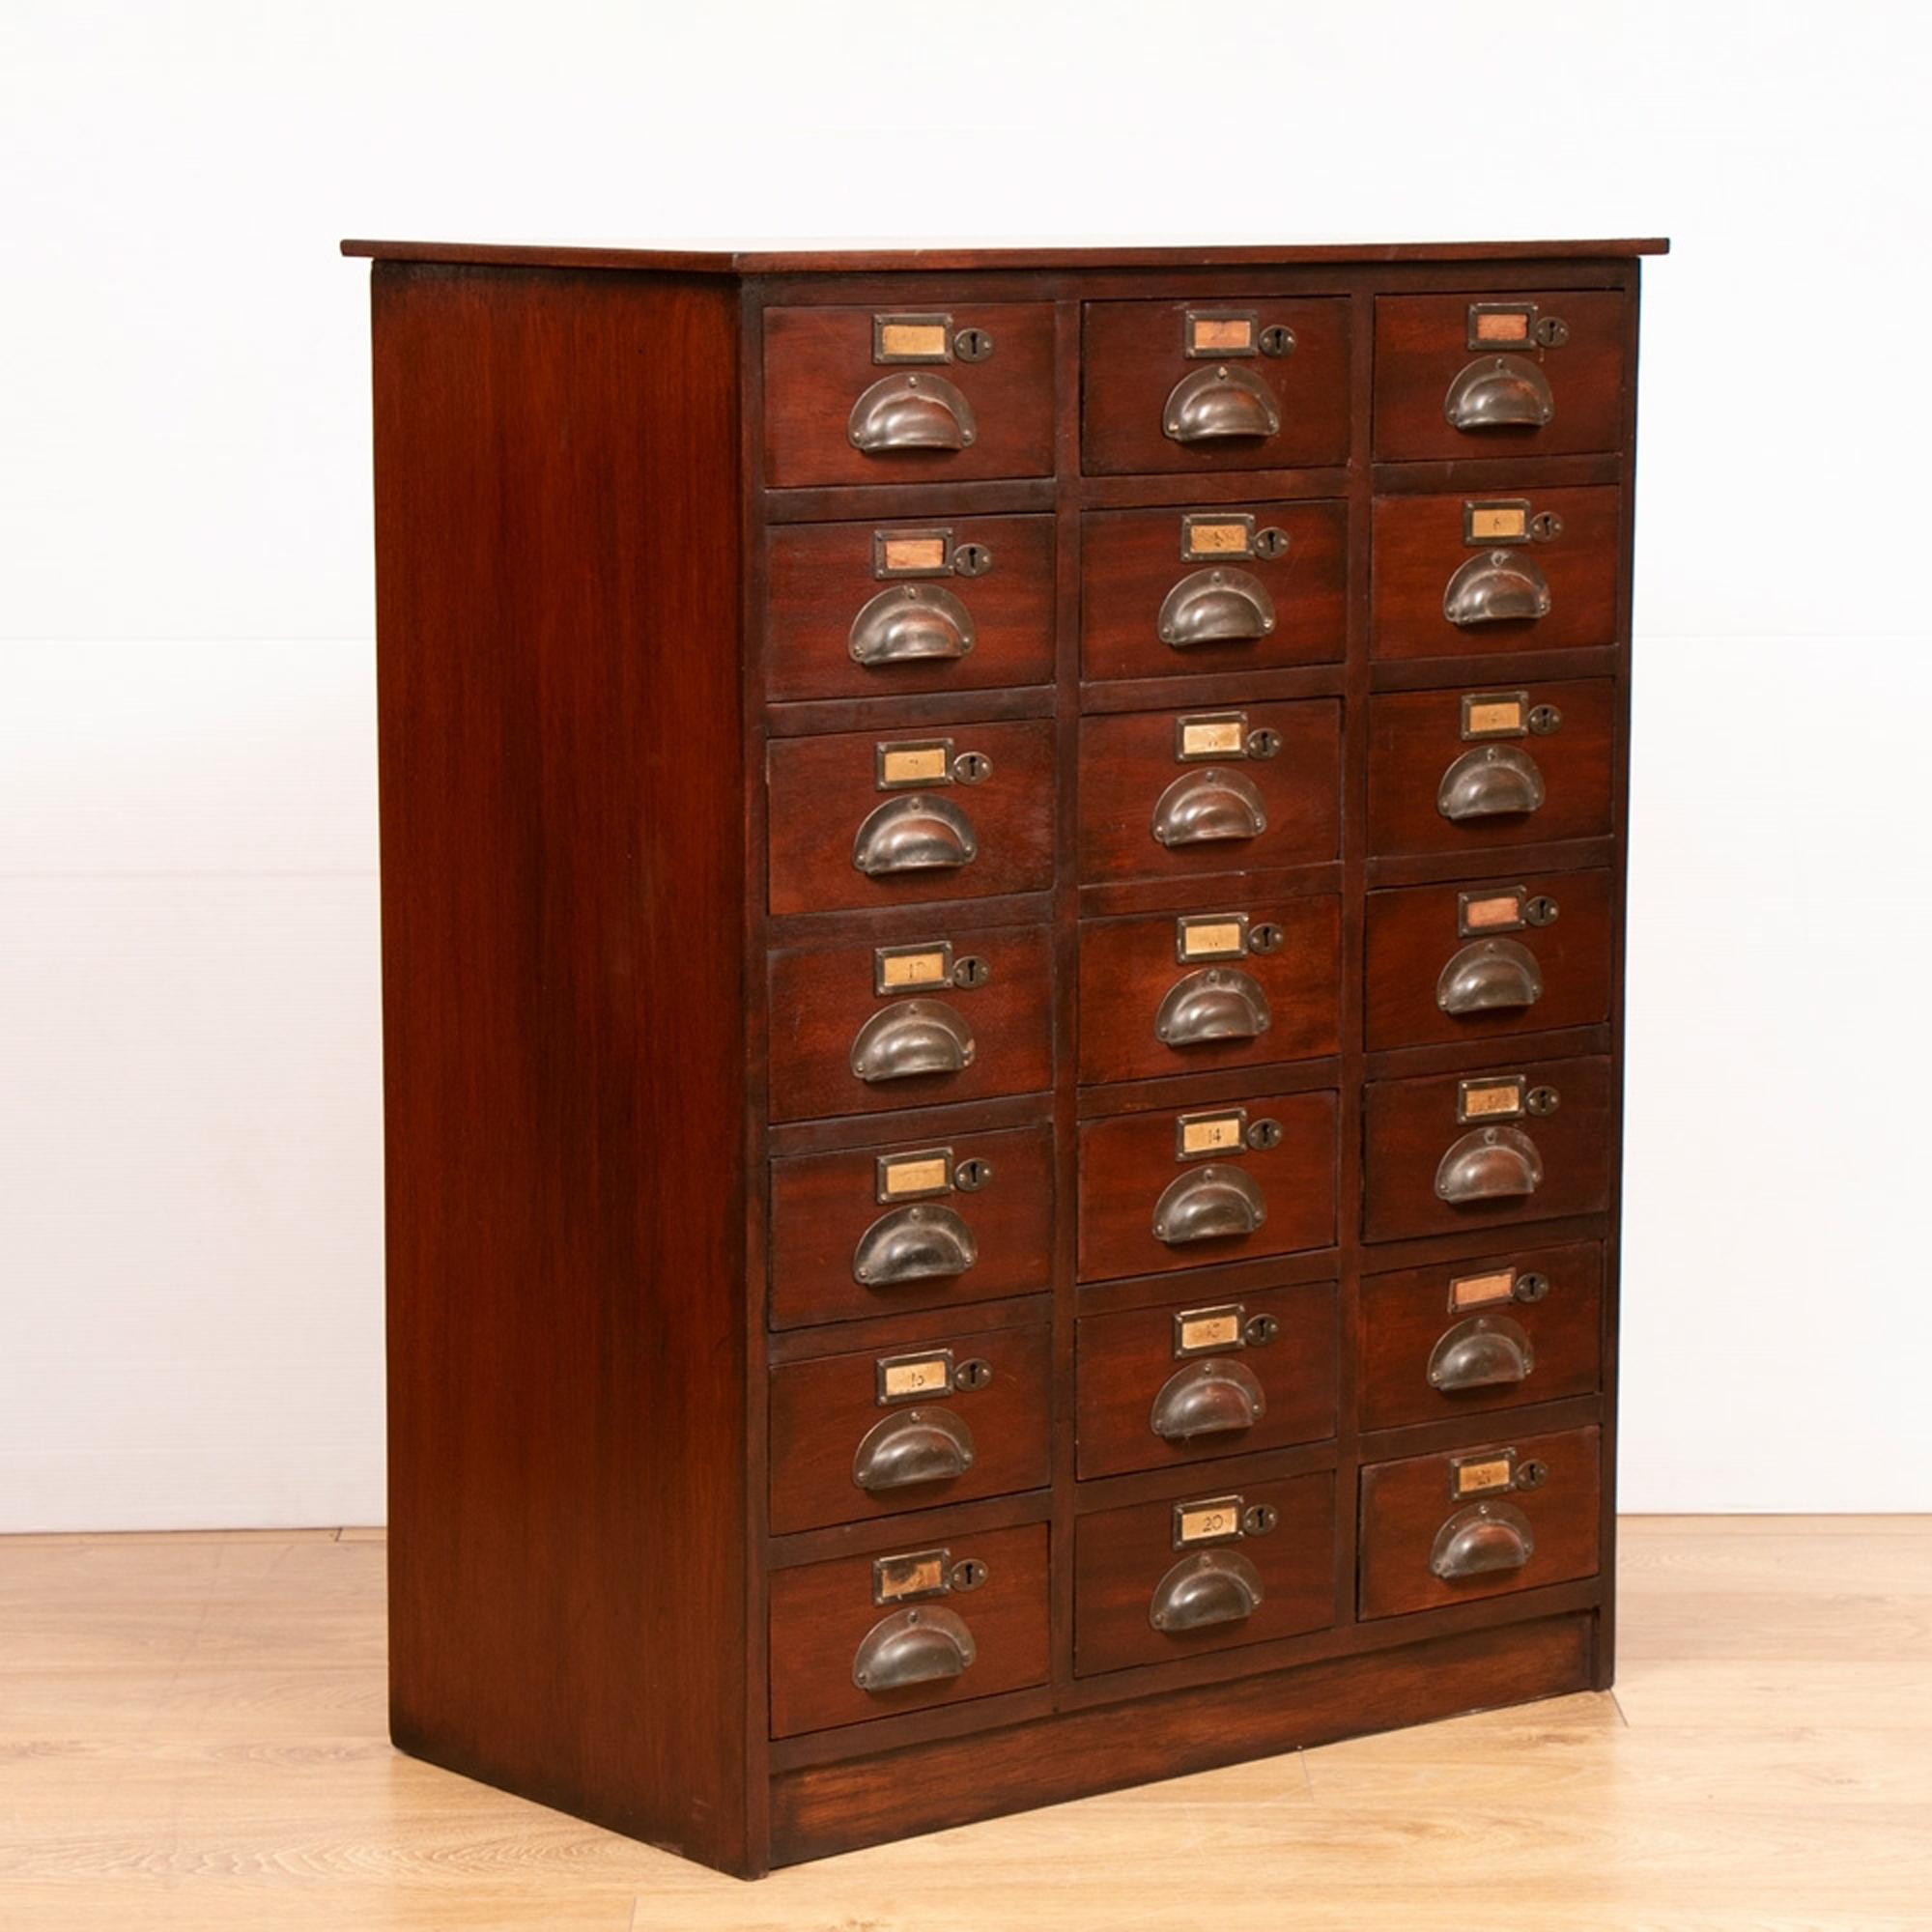 An antique bank of 21 drawers in mahogany with metal cup handles and label holders.
This is the Classic late Victorian era front of counter Shop fitting or Haberdashery fitment you would find all-over England in every village and town up and down